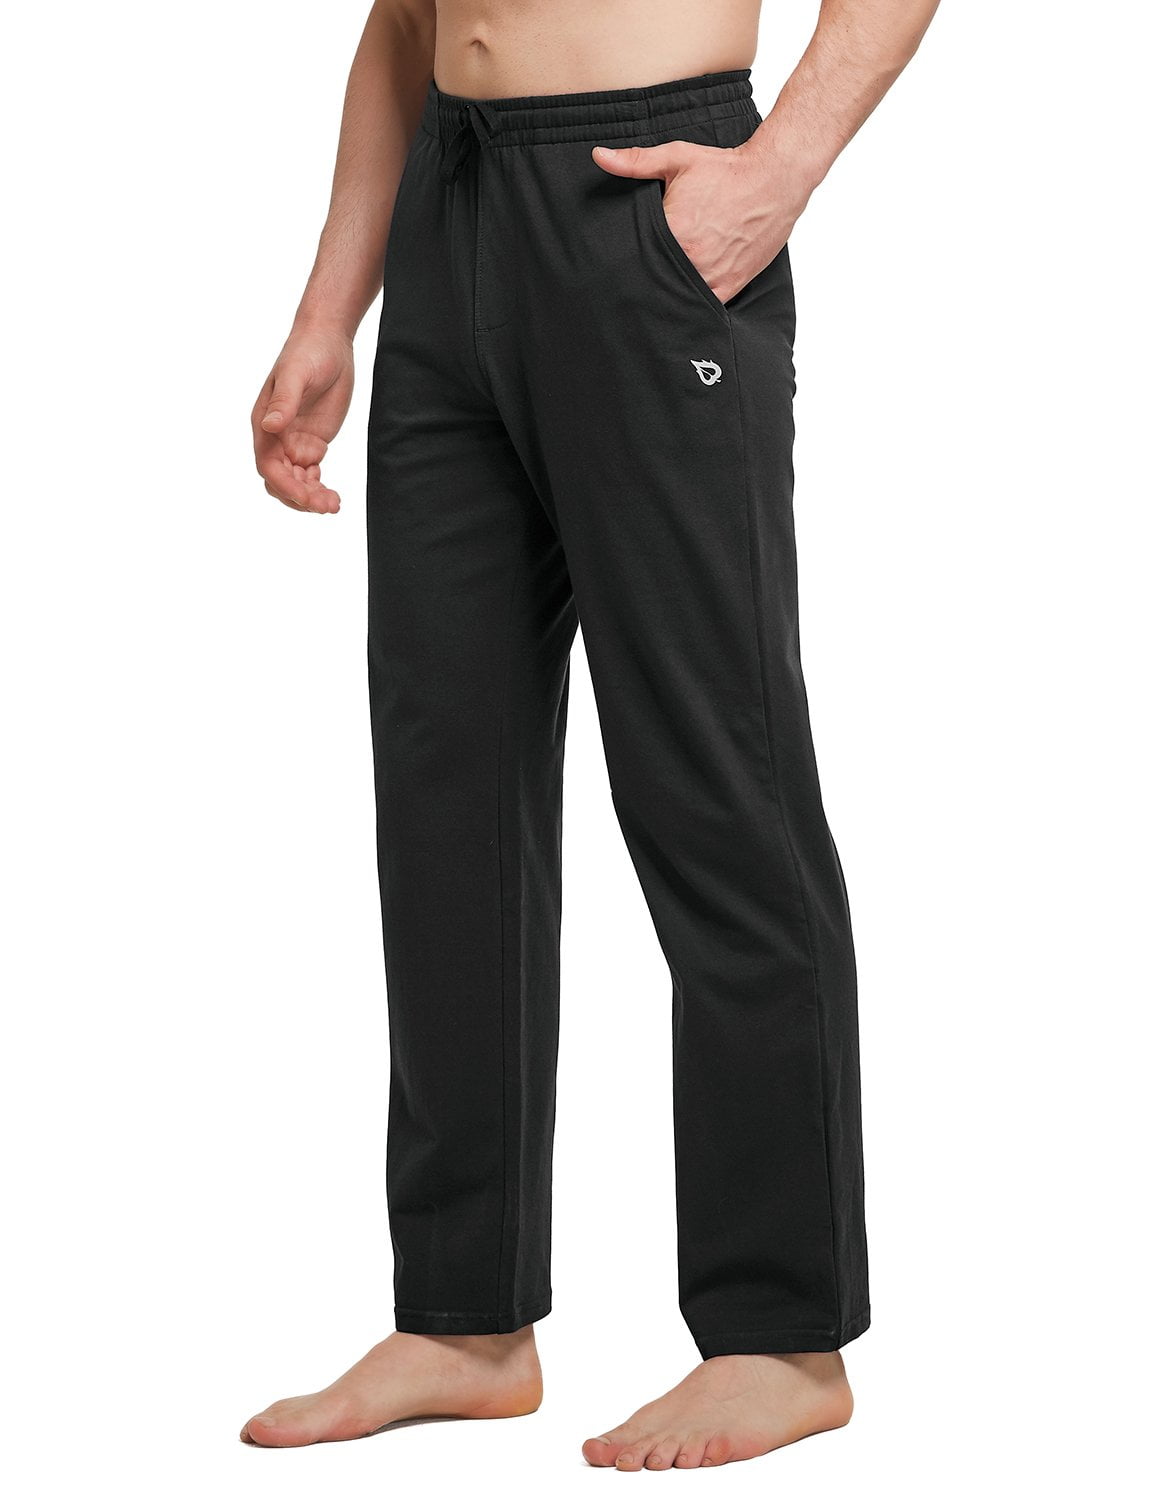 Up To 83% Off on Men's Yoga Lounge Pants Loose... | Groupon Goods